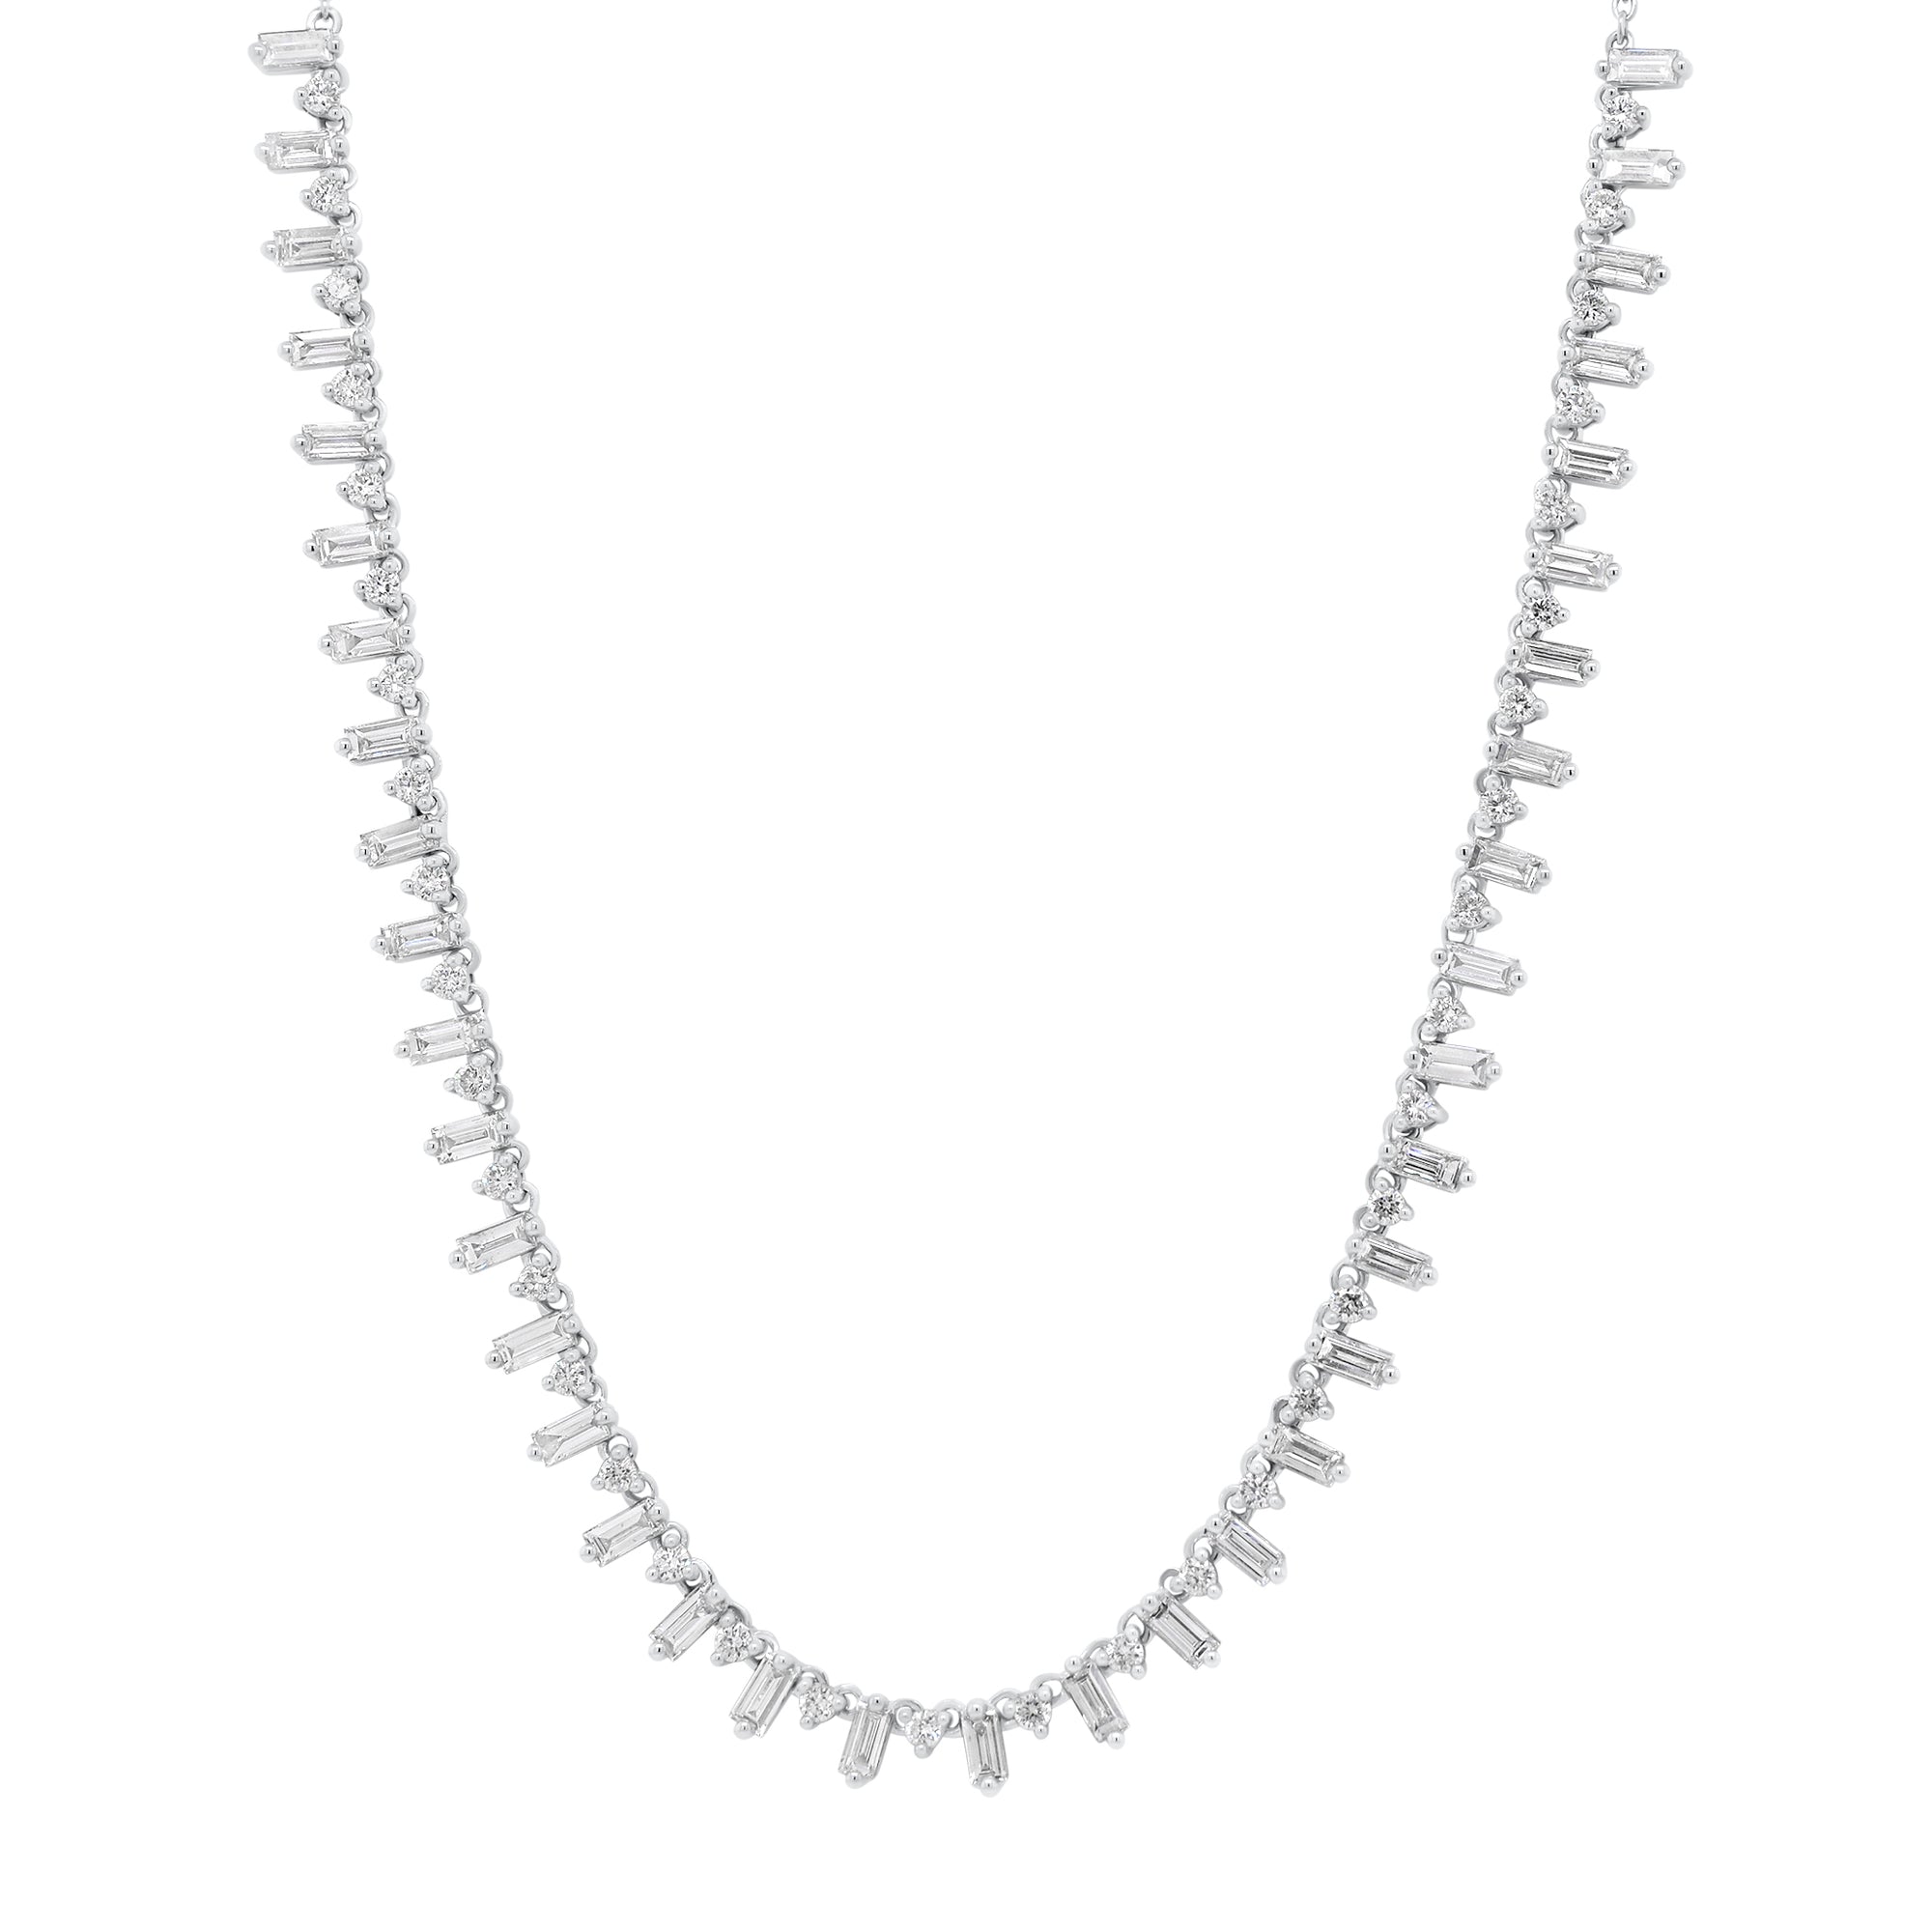 Baguette & Round Diamond Fashion Necklace  - 14K gold weighing 6.00 grams  - 38 slim baguettes totaling 1.81 carats  - 37 round diamonds totaling 0.59 carats